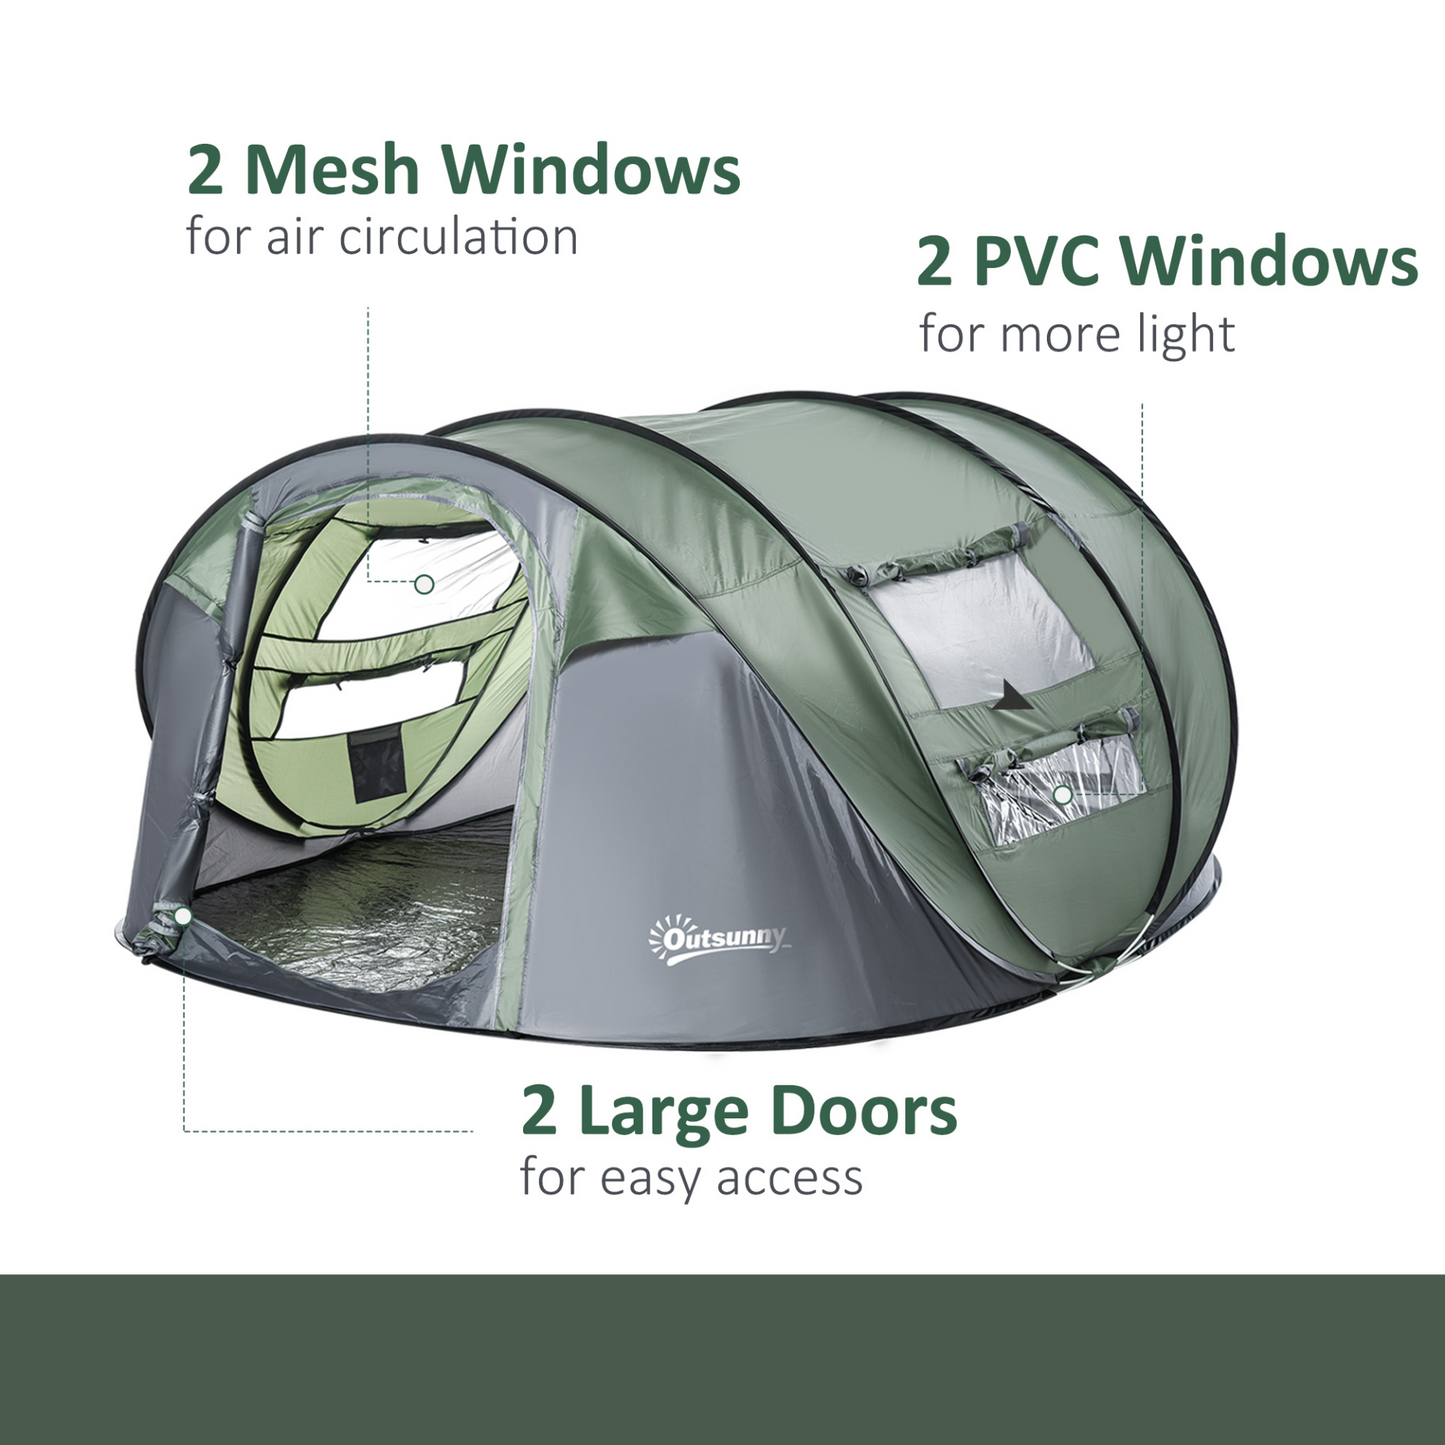 Outsunny 4-5 Person Pop-up Camping Tent Waterproof Family Tent w/ 2 Mesh Windows & PVC Windows Portable Carry Bag for Outdoor Trip Dark Green